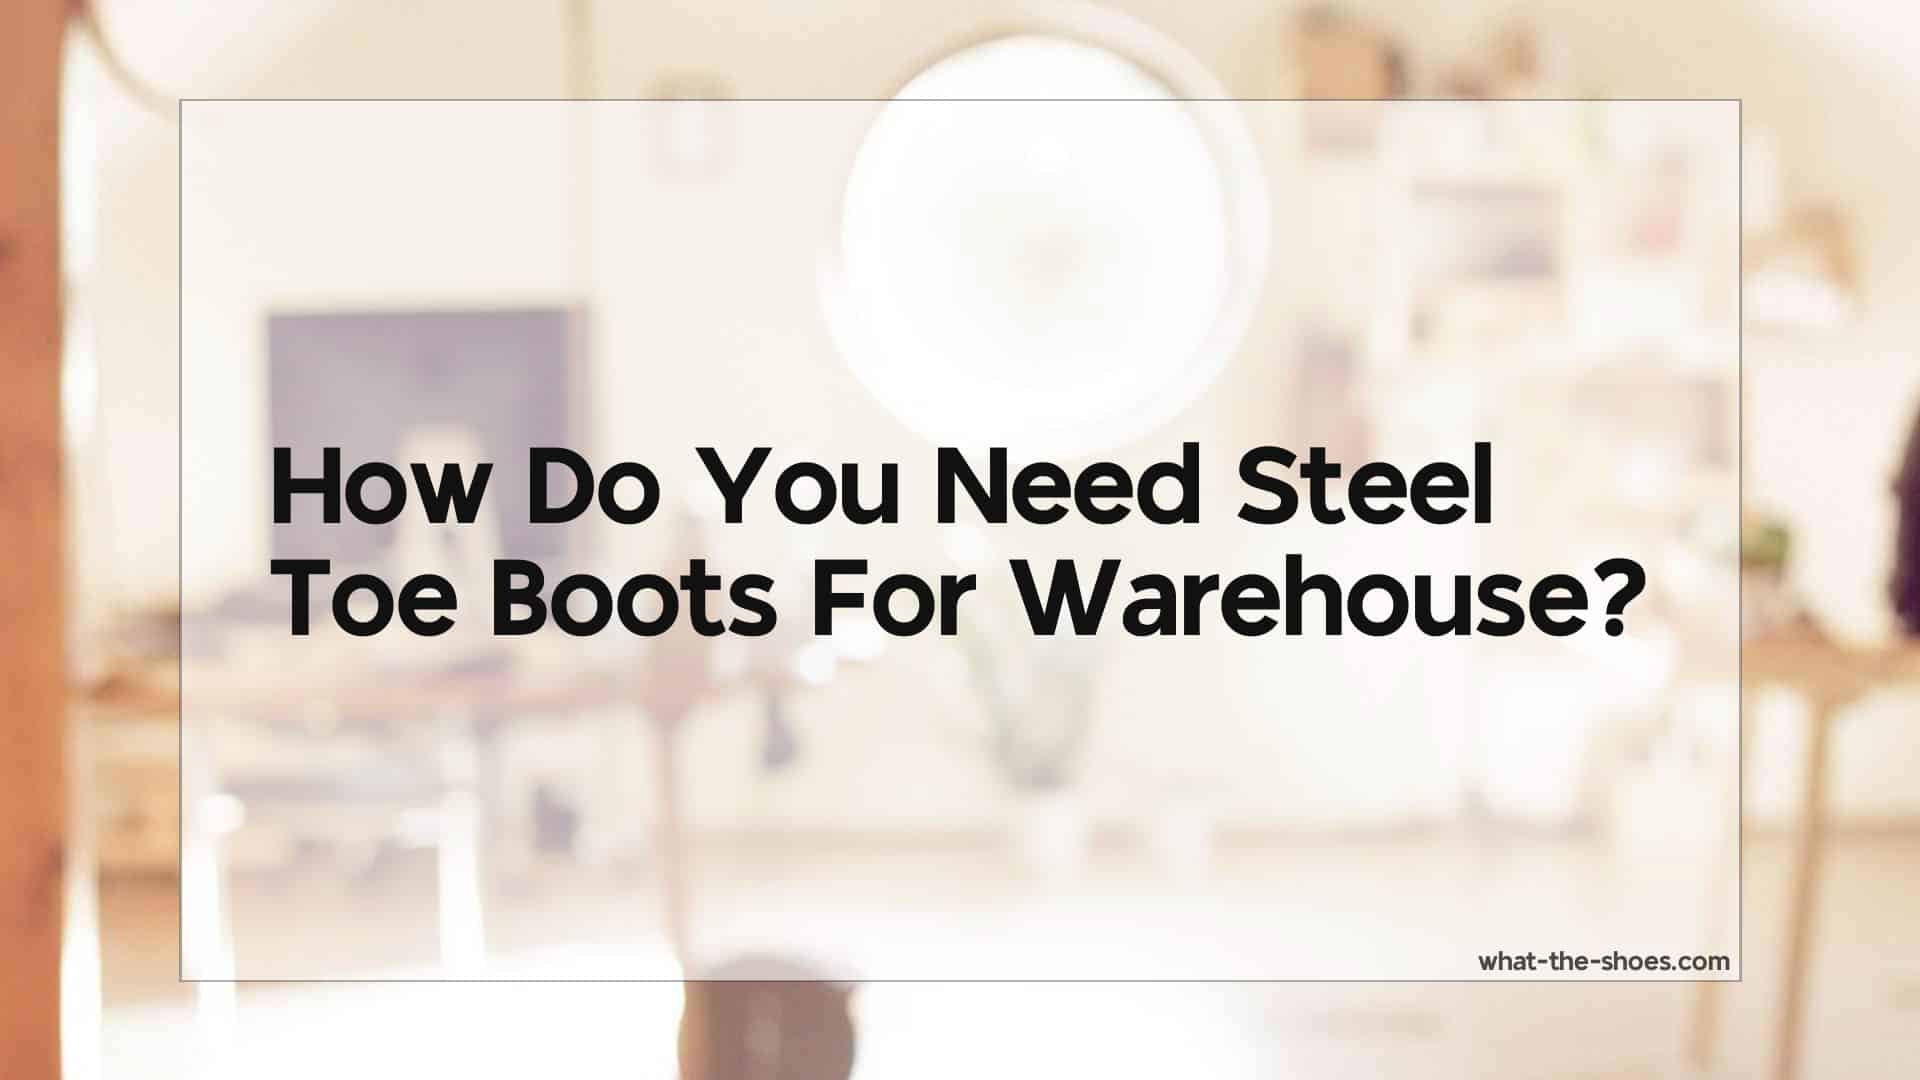 Do You Need Steel Toe Boots For Warehouse?